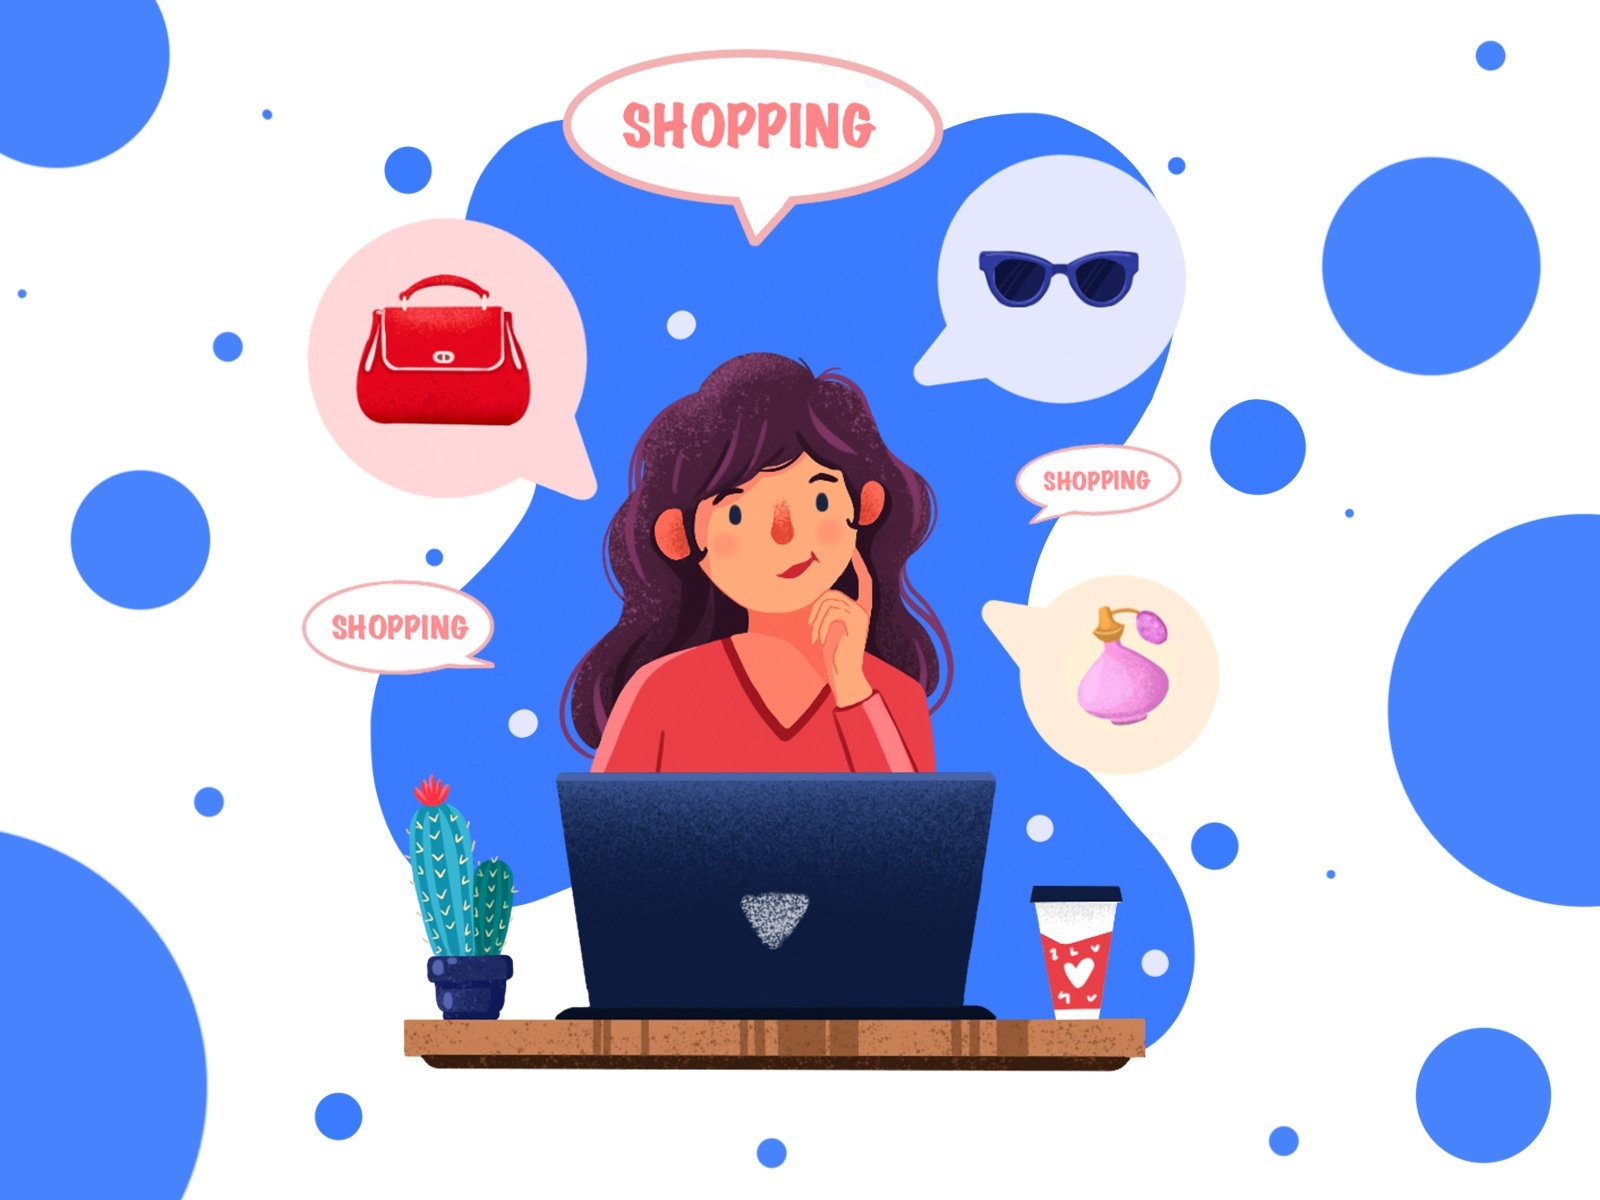 Ecommerce design trends - by Daria